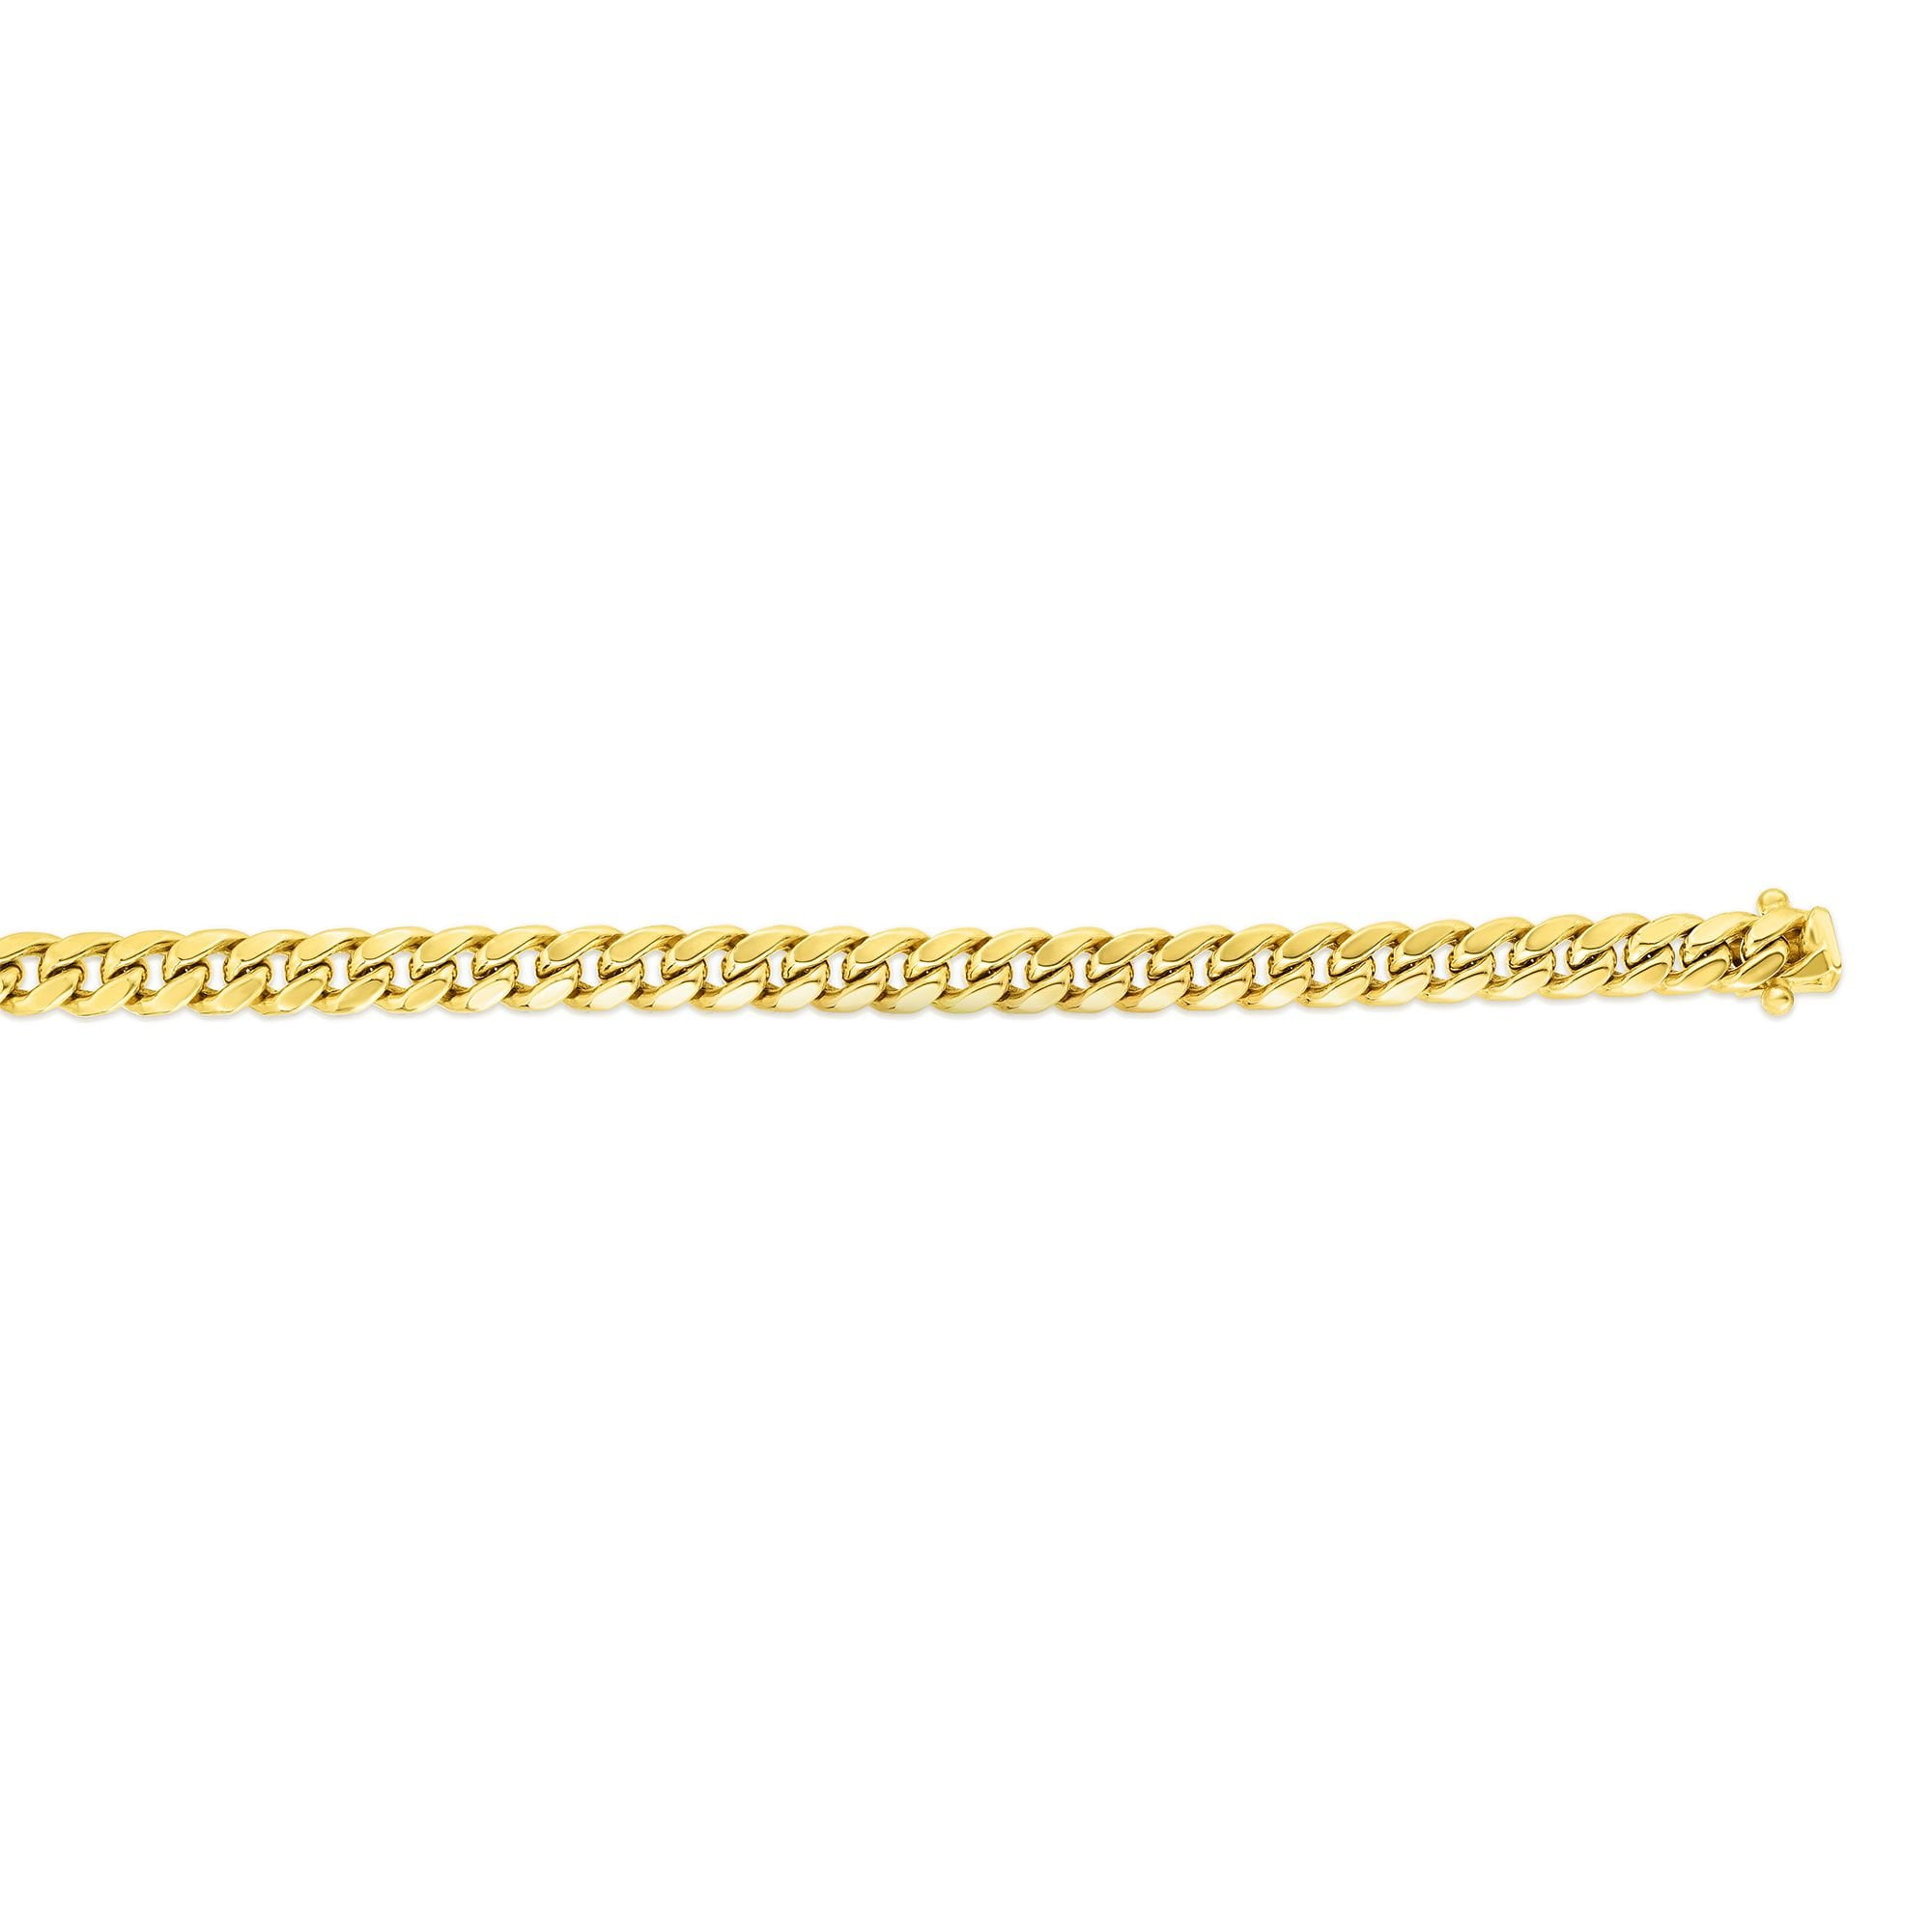 PriceRock 10k Gold 1.75mm Polished 22 inch Figaro Chain Necklace 22 Inches